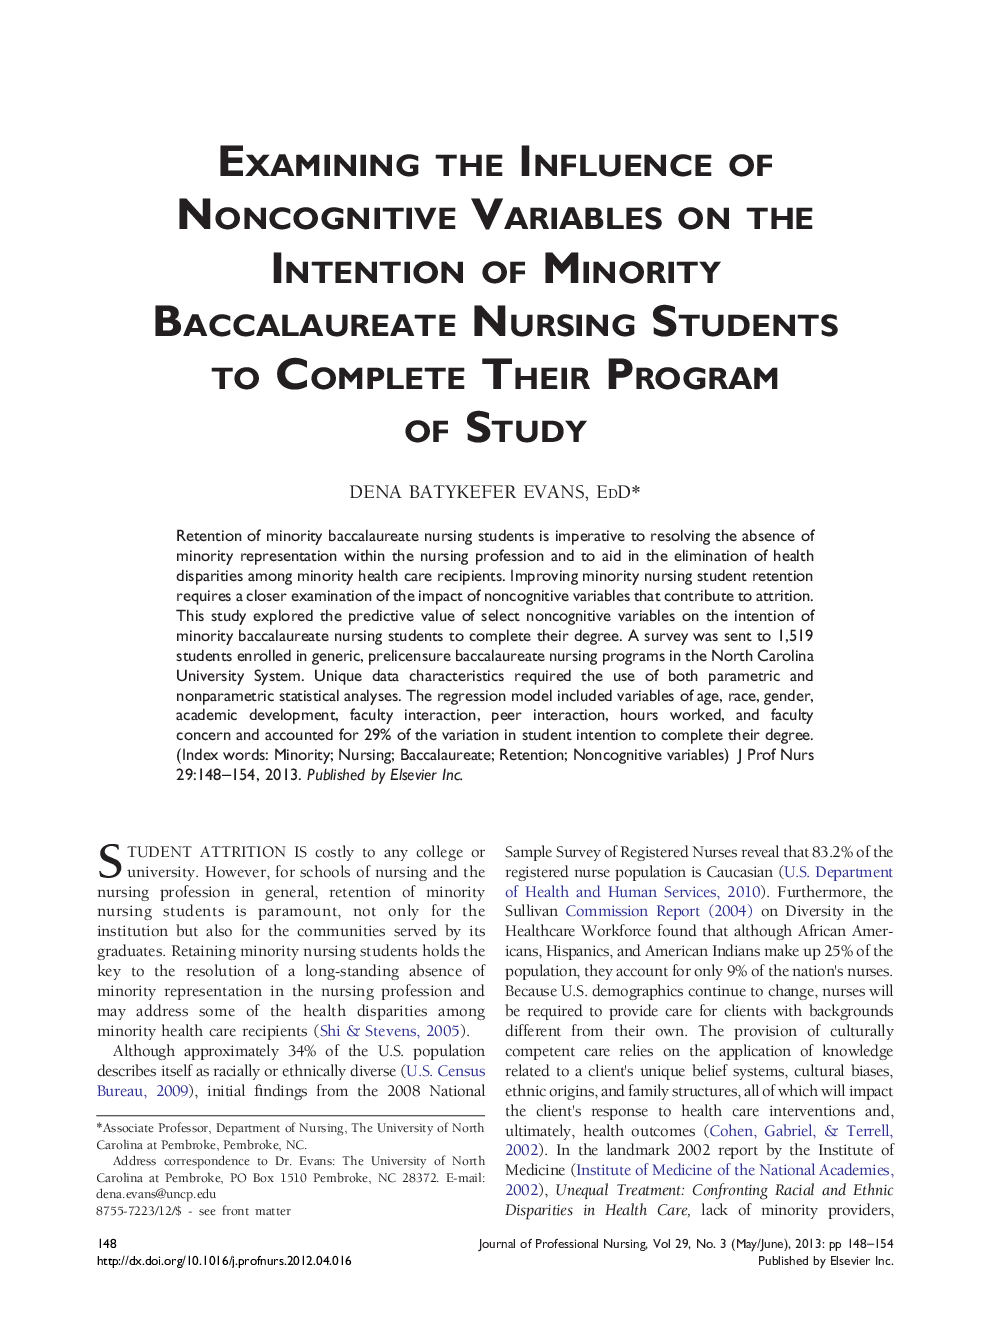 Examining the Influence of Noncognitive Variables on the Intention of Minority Baccalaureate Nursing Students to Complete Their Program of Study